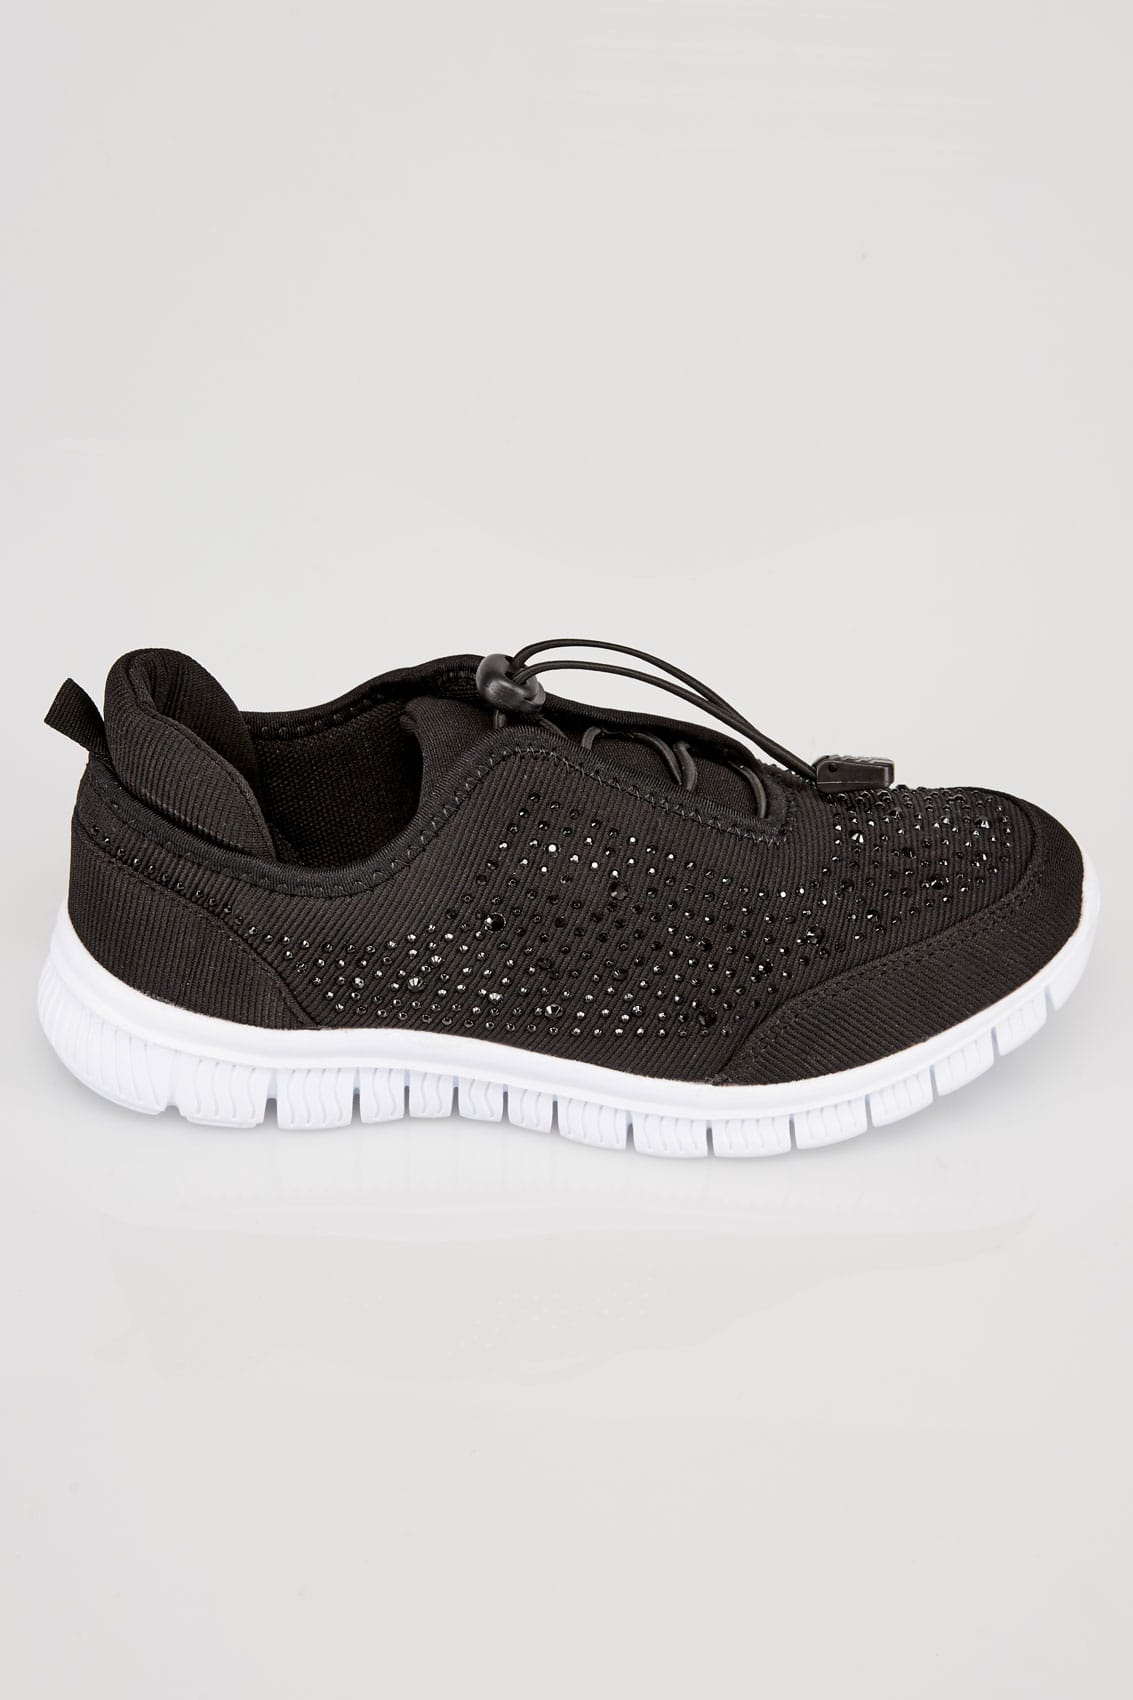 Black Embellished Trainers In EEE Fit